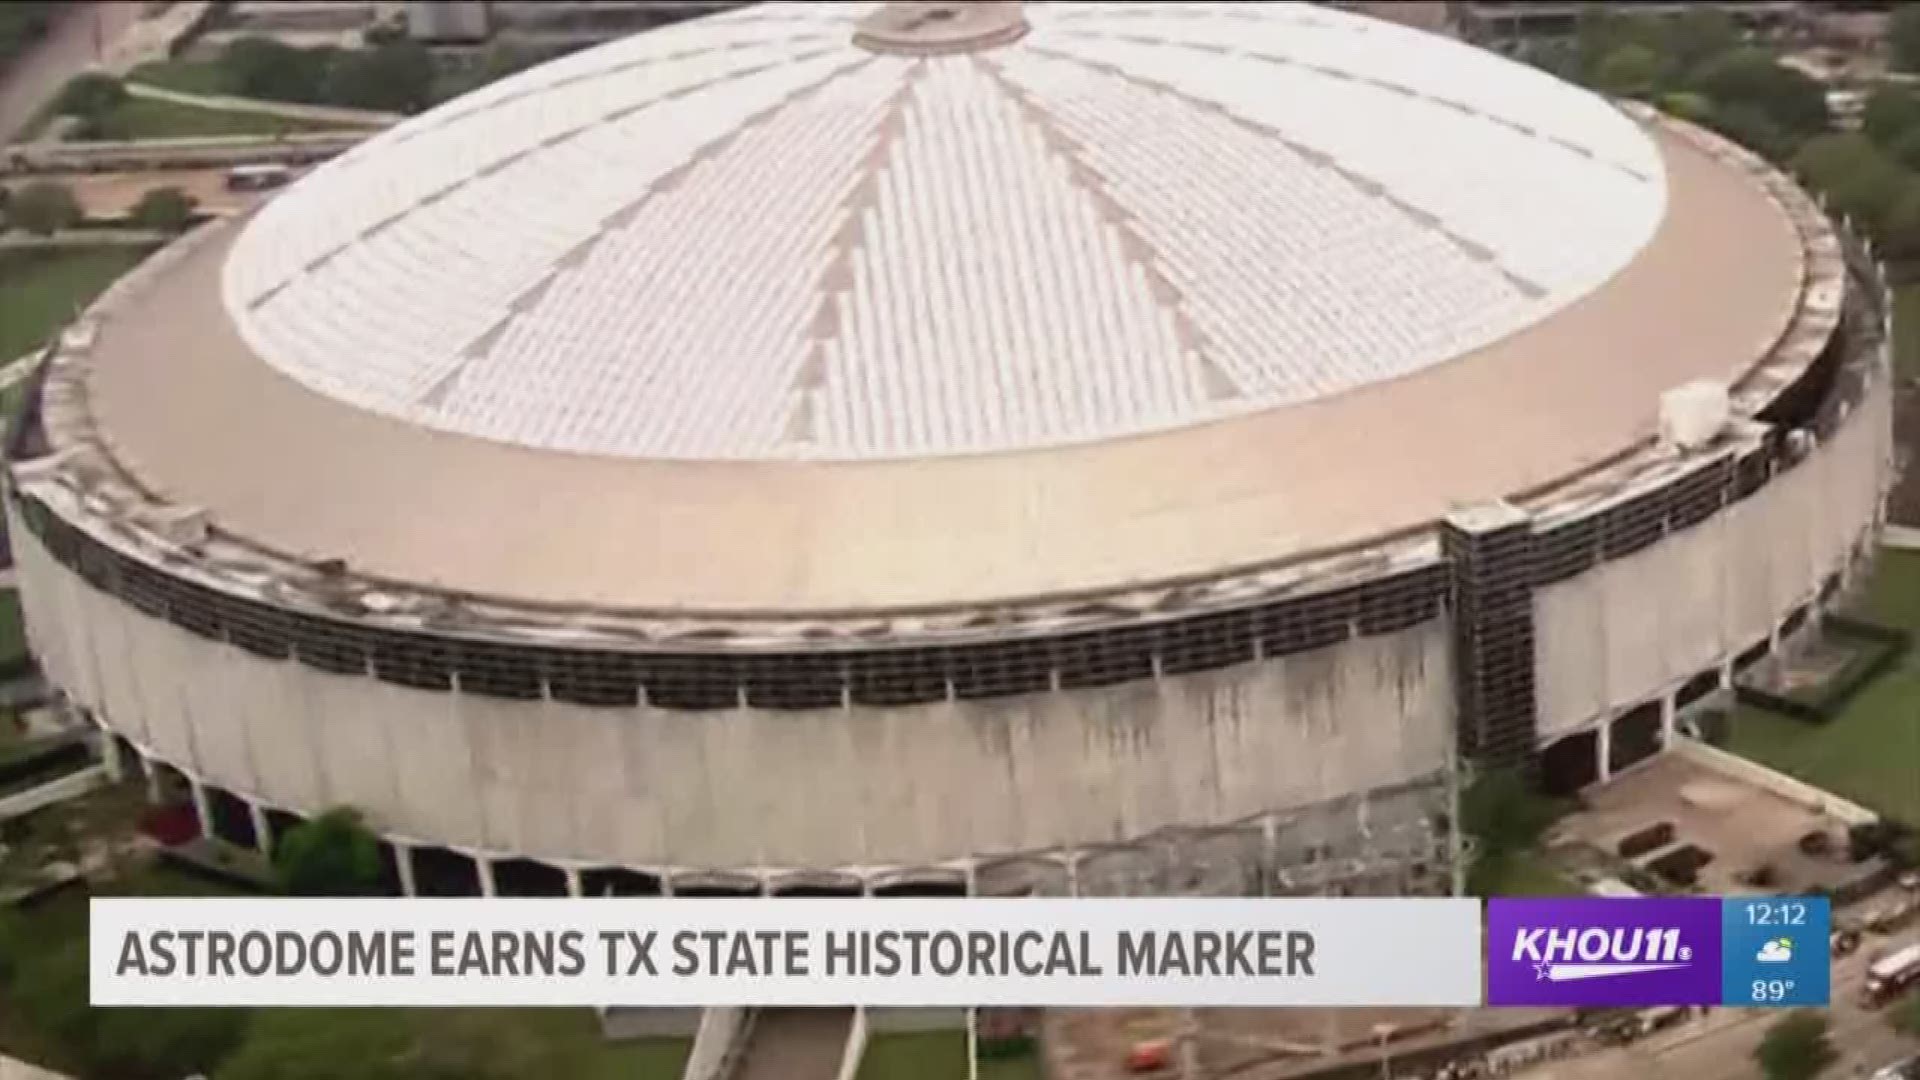 The Harris County Historical Commission will dedicate a new Texas State Historical Marker for the Astrodome Tuesday afternoon.